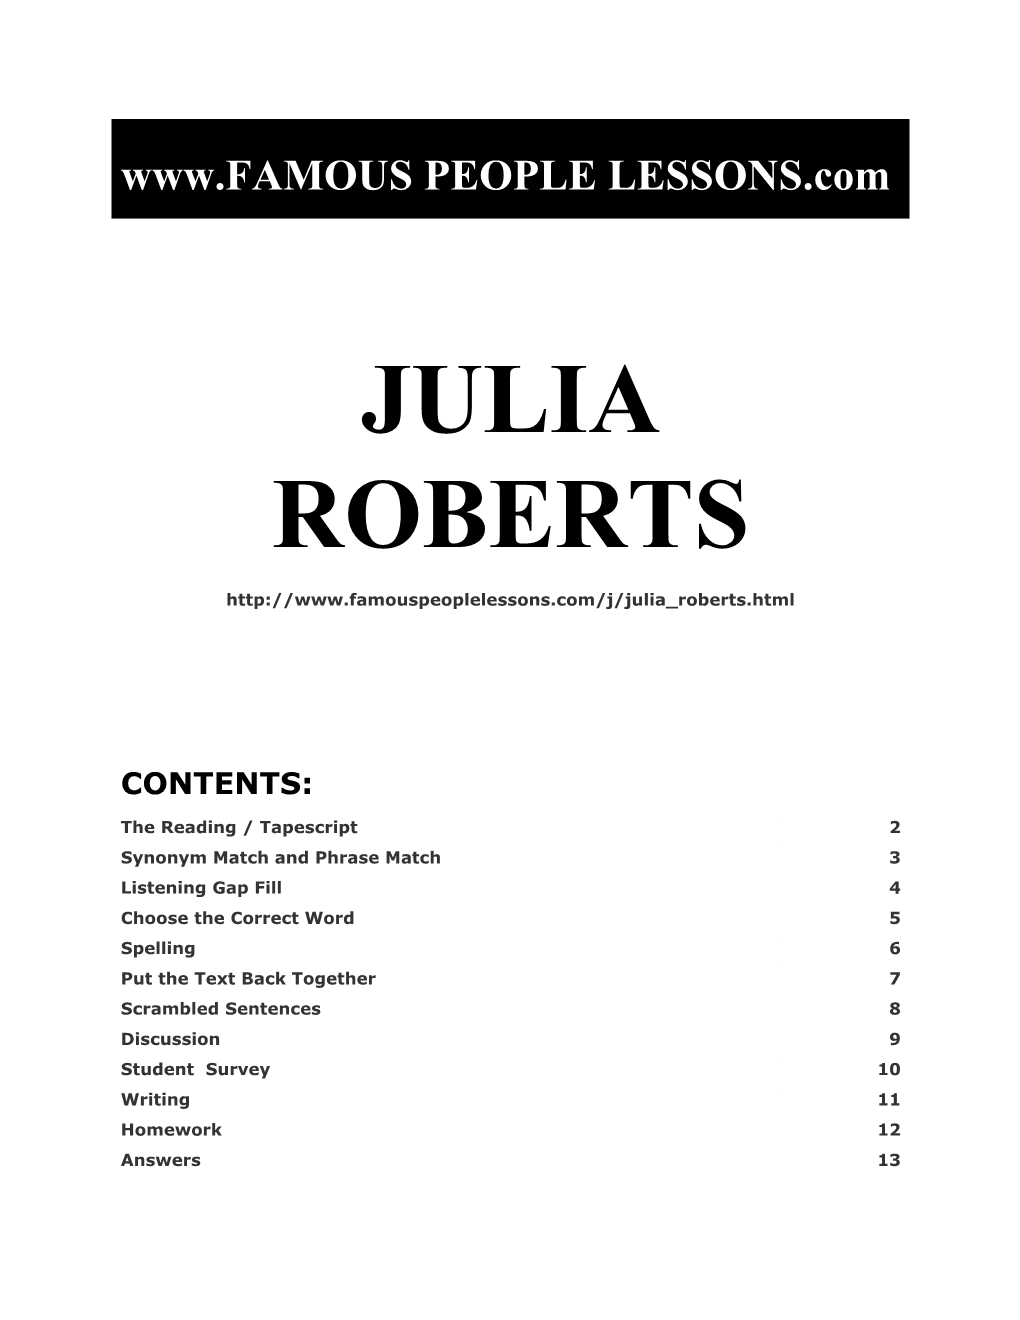 Famous People Lessons - Julia Roberts